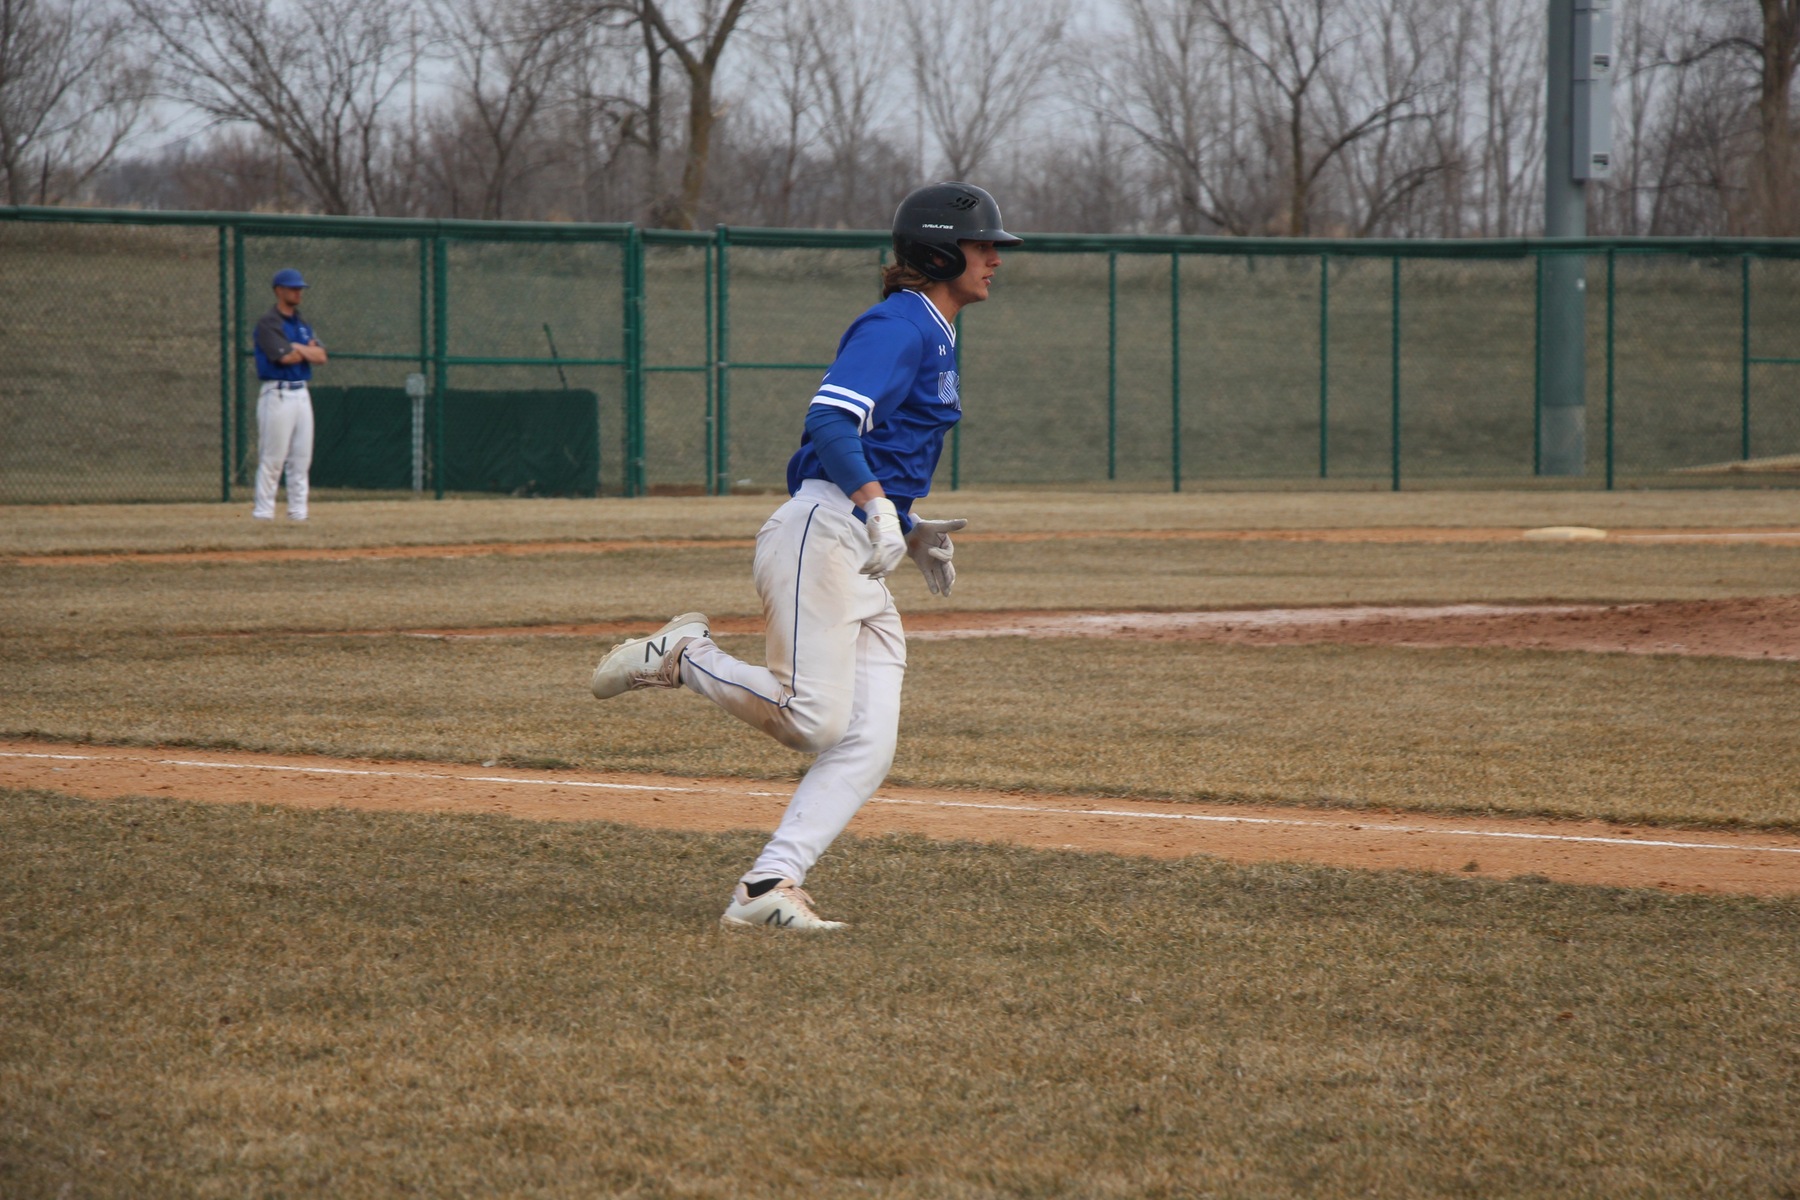 Lakers Fall Twice to NIACC on Day Two of the Series